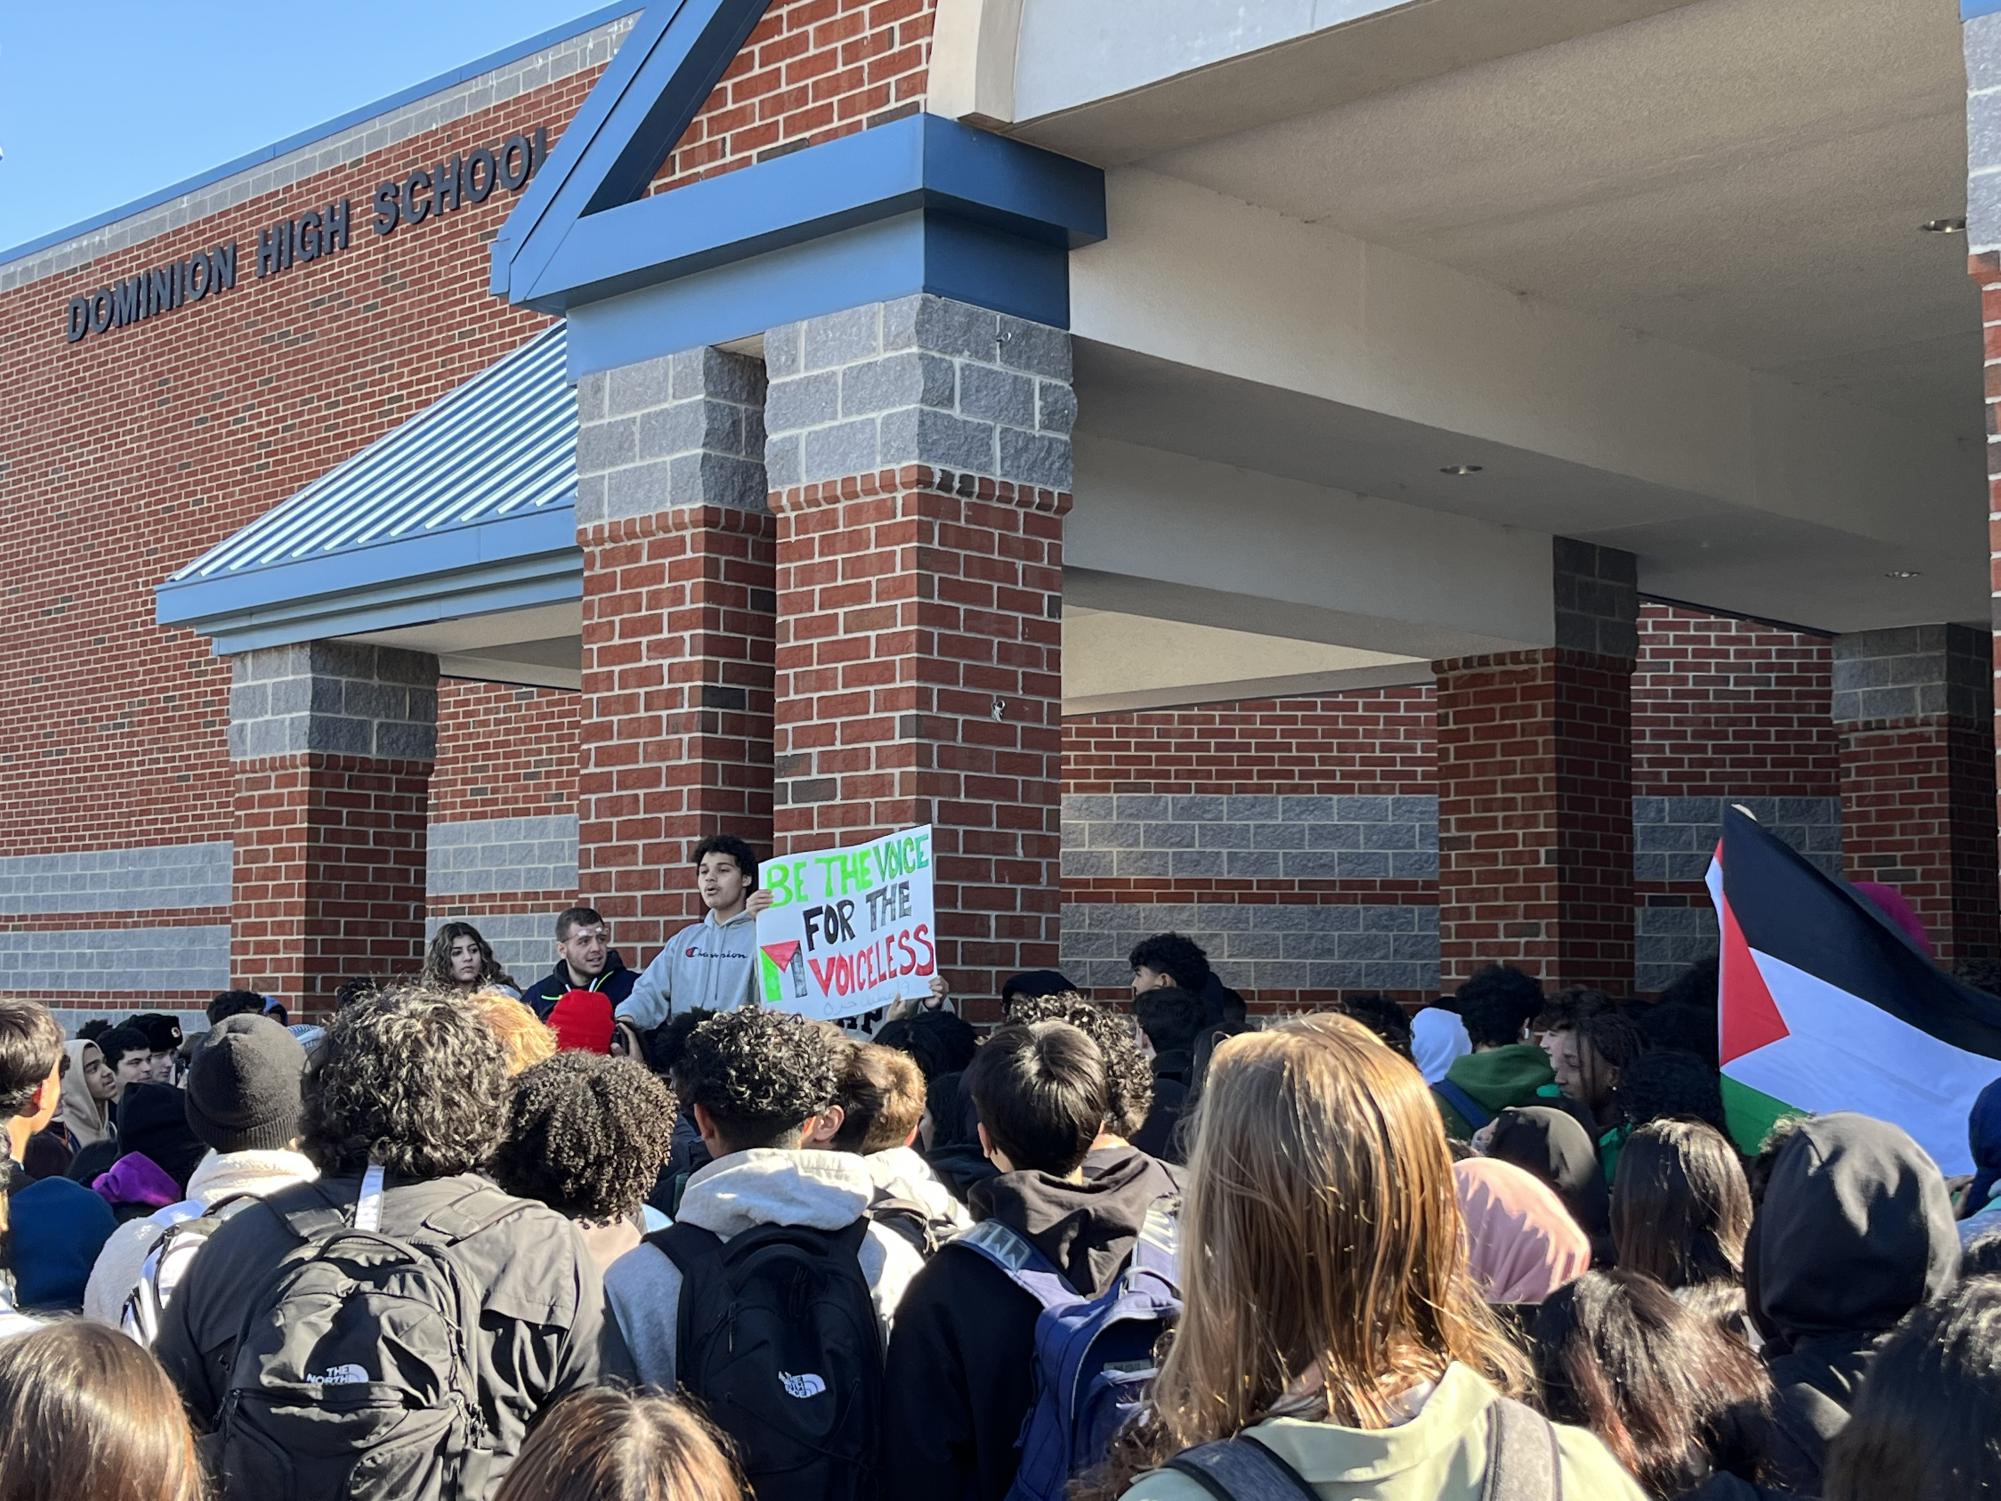 Students displayed signs and a Palestinian flag during the walkout